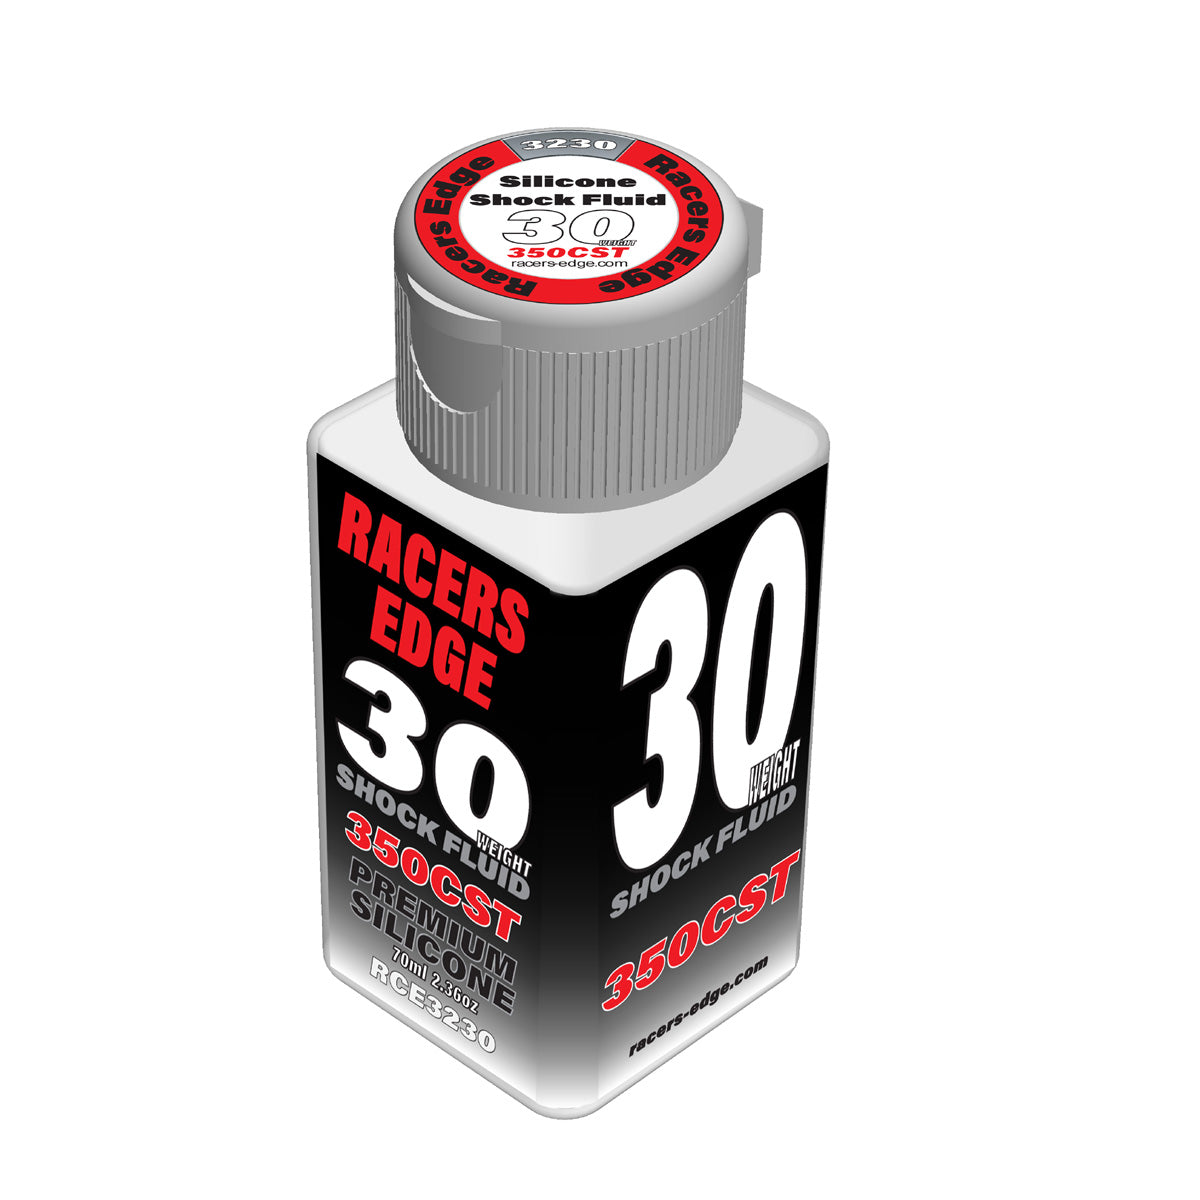 Racers Edge RCE3230 30 Weight, 350cSt, 70ml 2.36oz Pure Silicone Shock Oil